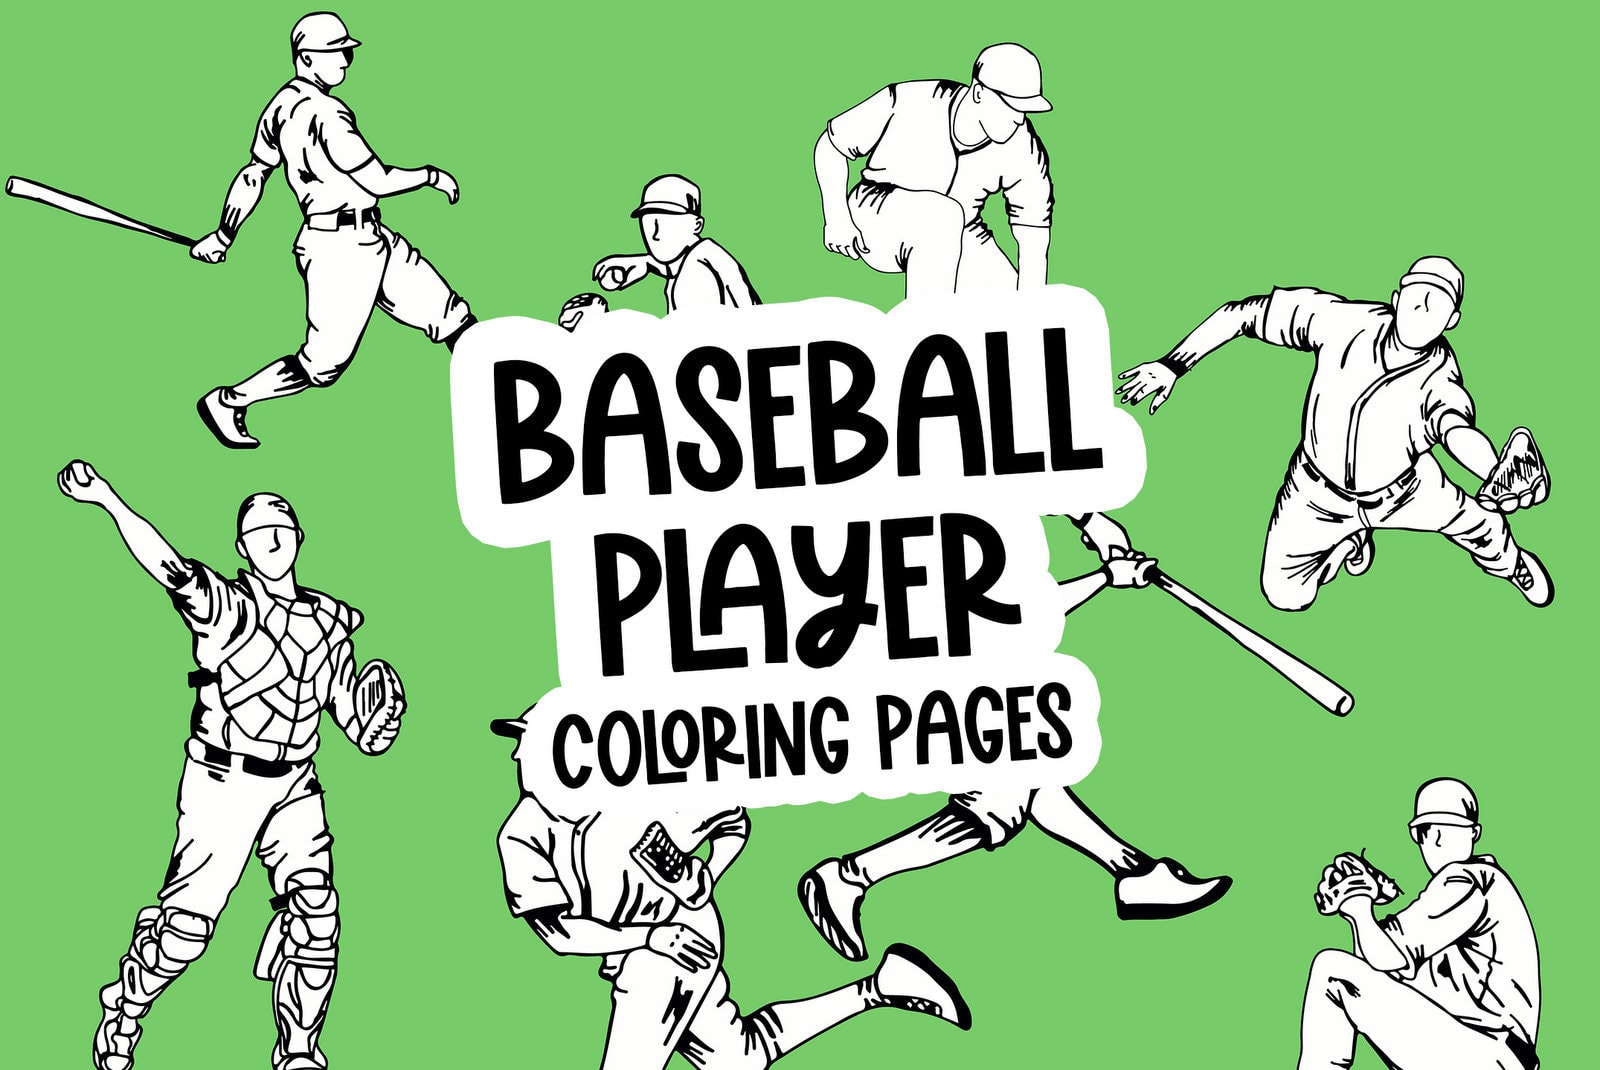 Baseball player coloring pages clipart free sports printables at